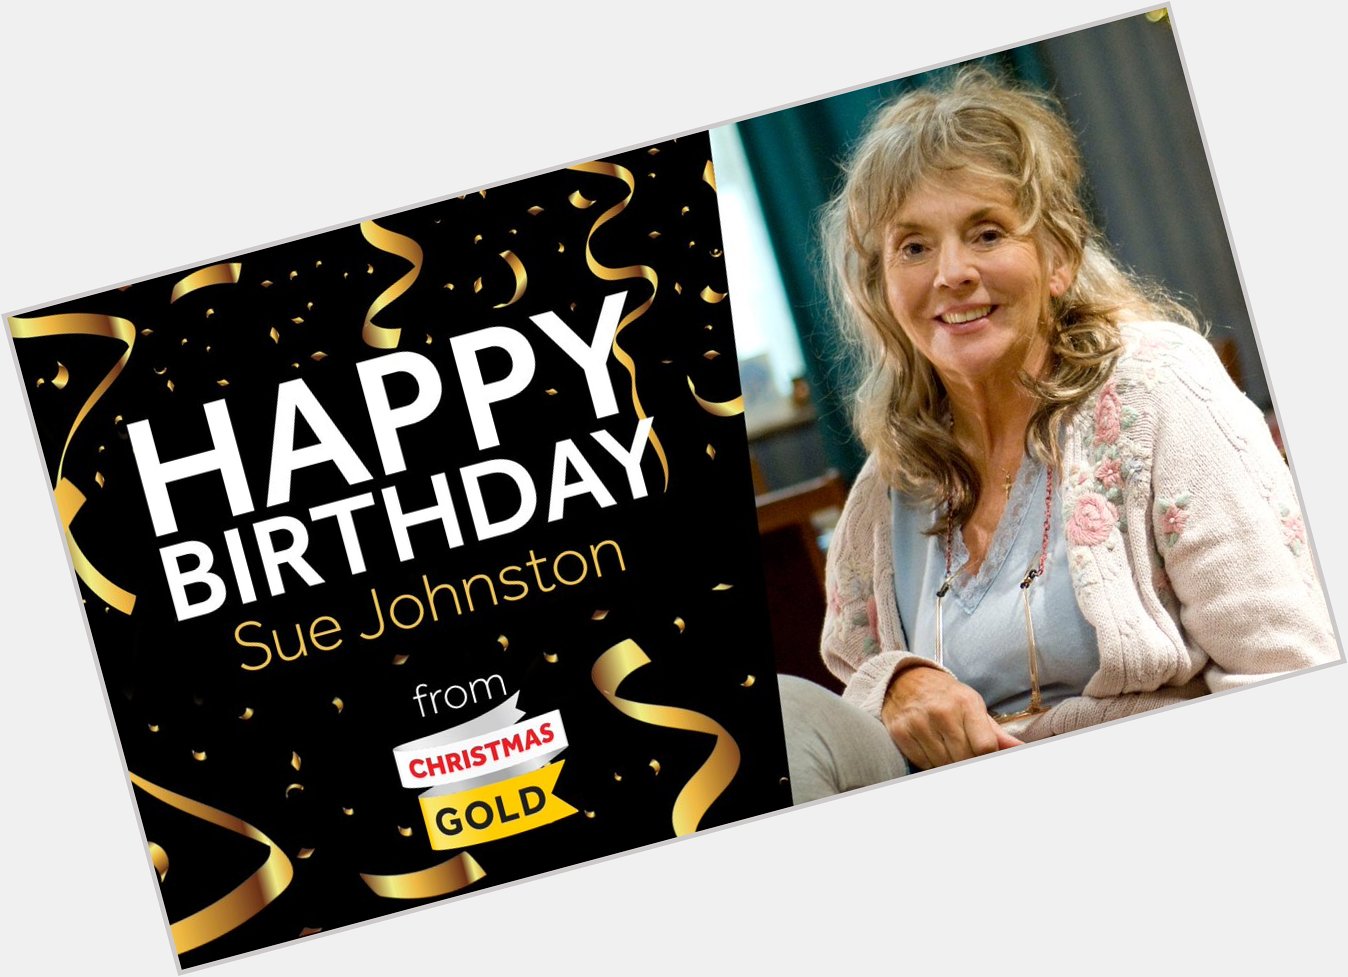 Please join us in wishing the wonderful Sue Johnston a very Happy Birthday! 